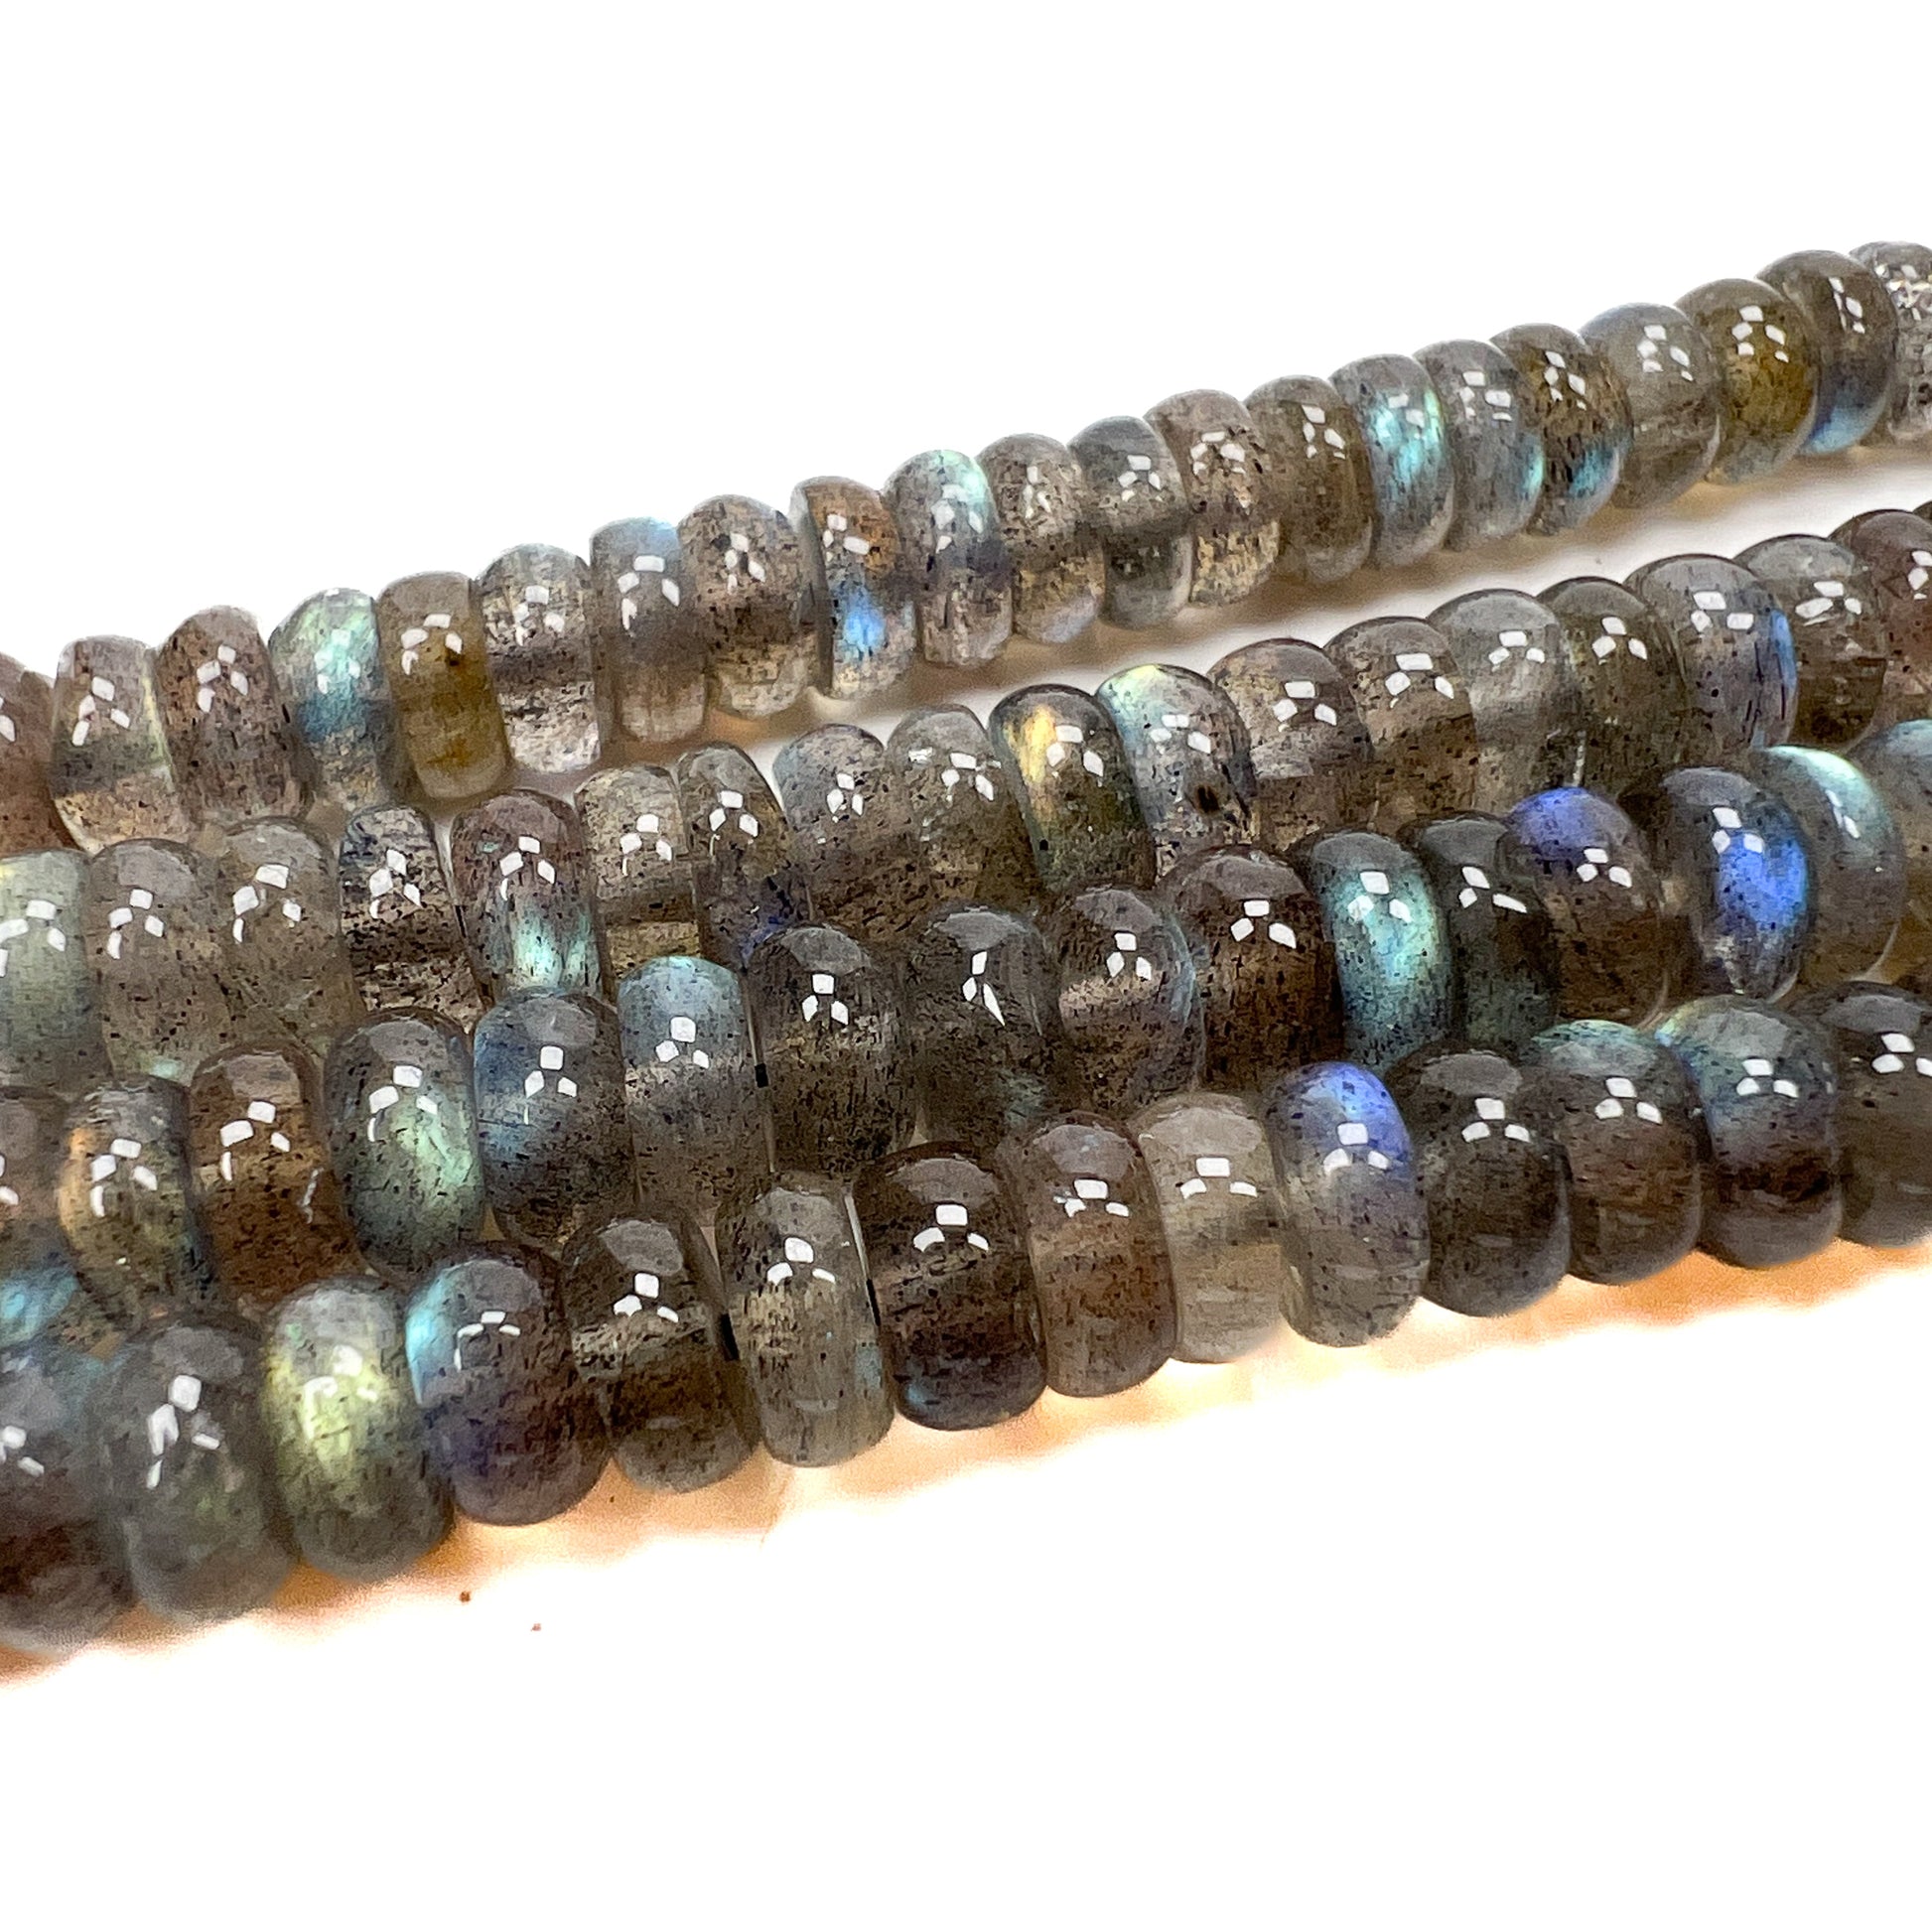 Labradorite 7mm Smooth Slice Bead (2 Quantities Available)